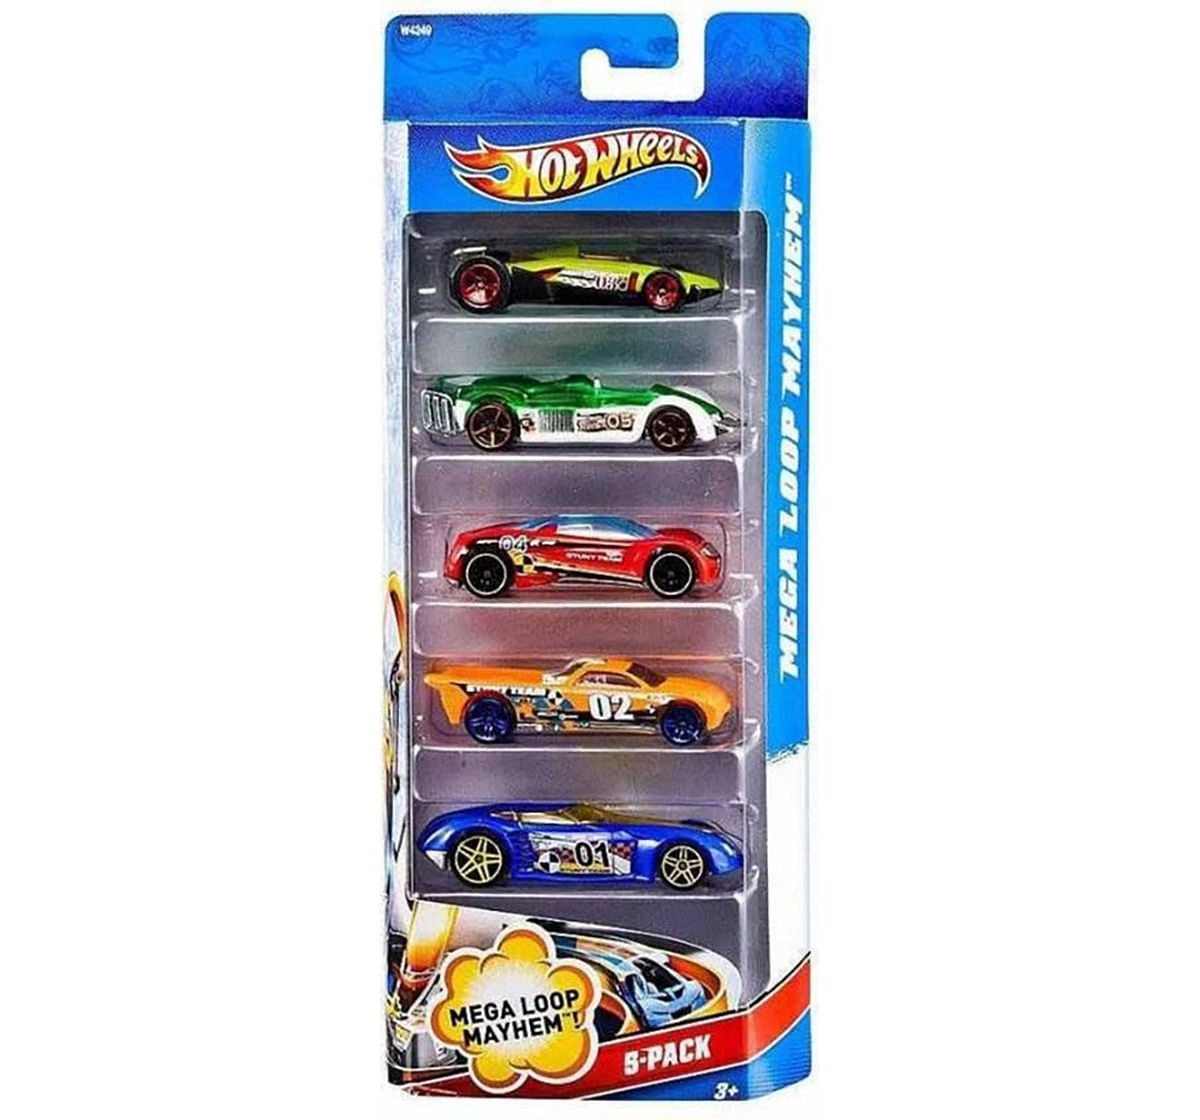 Hot Wheels Die Cast Cars Pack of 5 Vehicles for Kids age 3Y+, Assorted